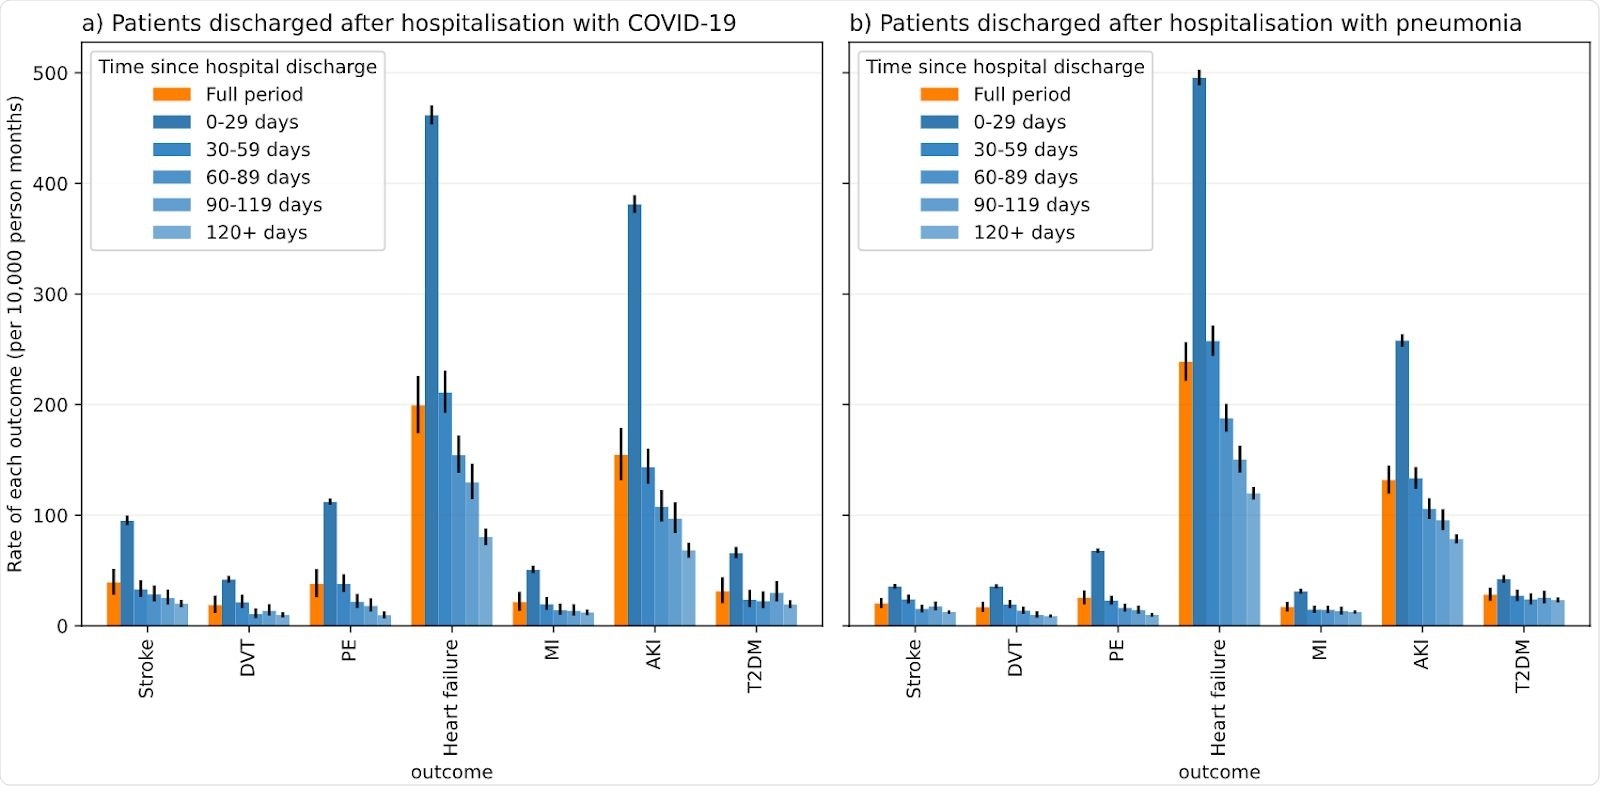 Rate of outcomes (events per 10,000 person months) in time periods following hospital discharge for COVID-19/pneumonia.